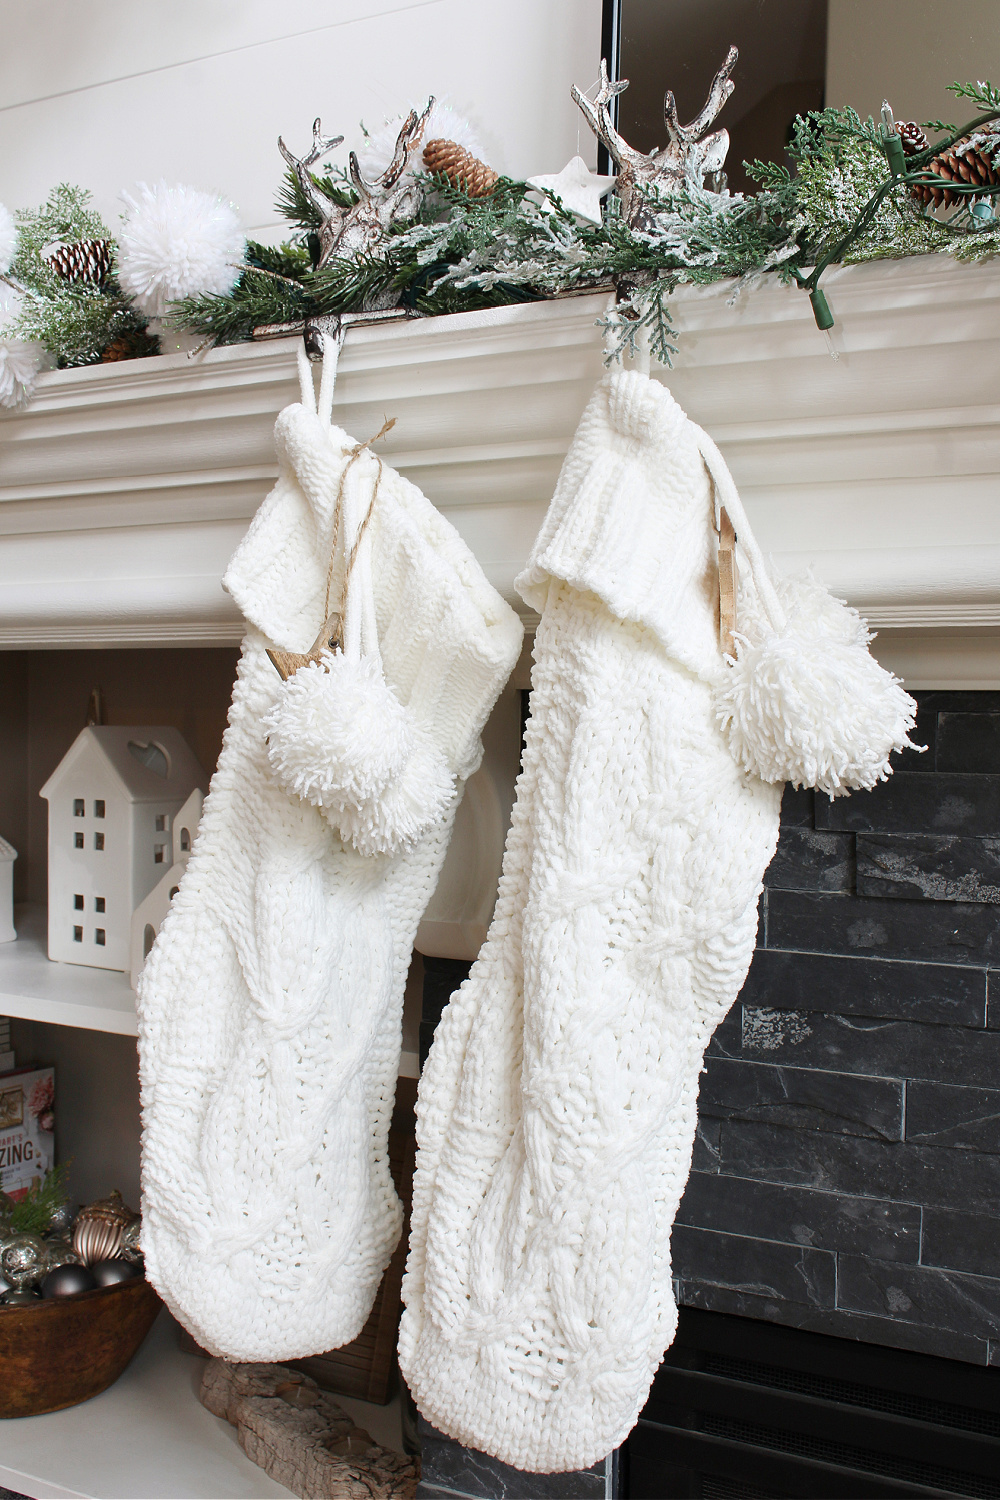 White knit Christmas stockings hung from a winter wonderland Christmas mantel.